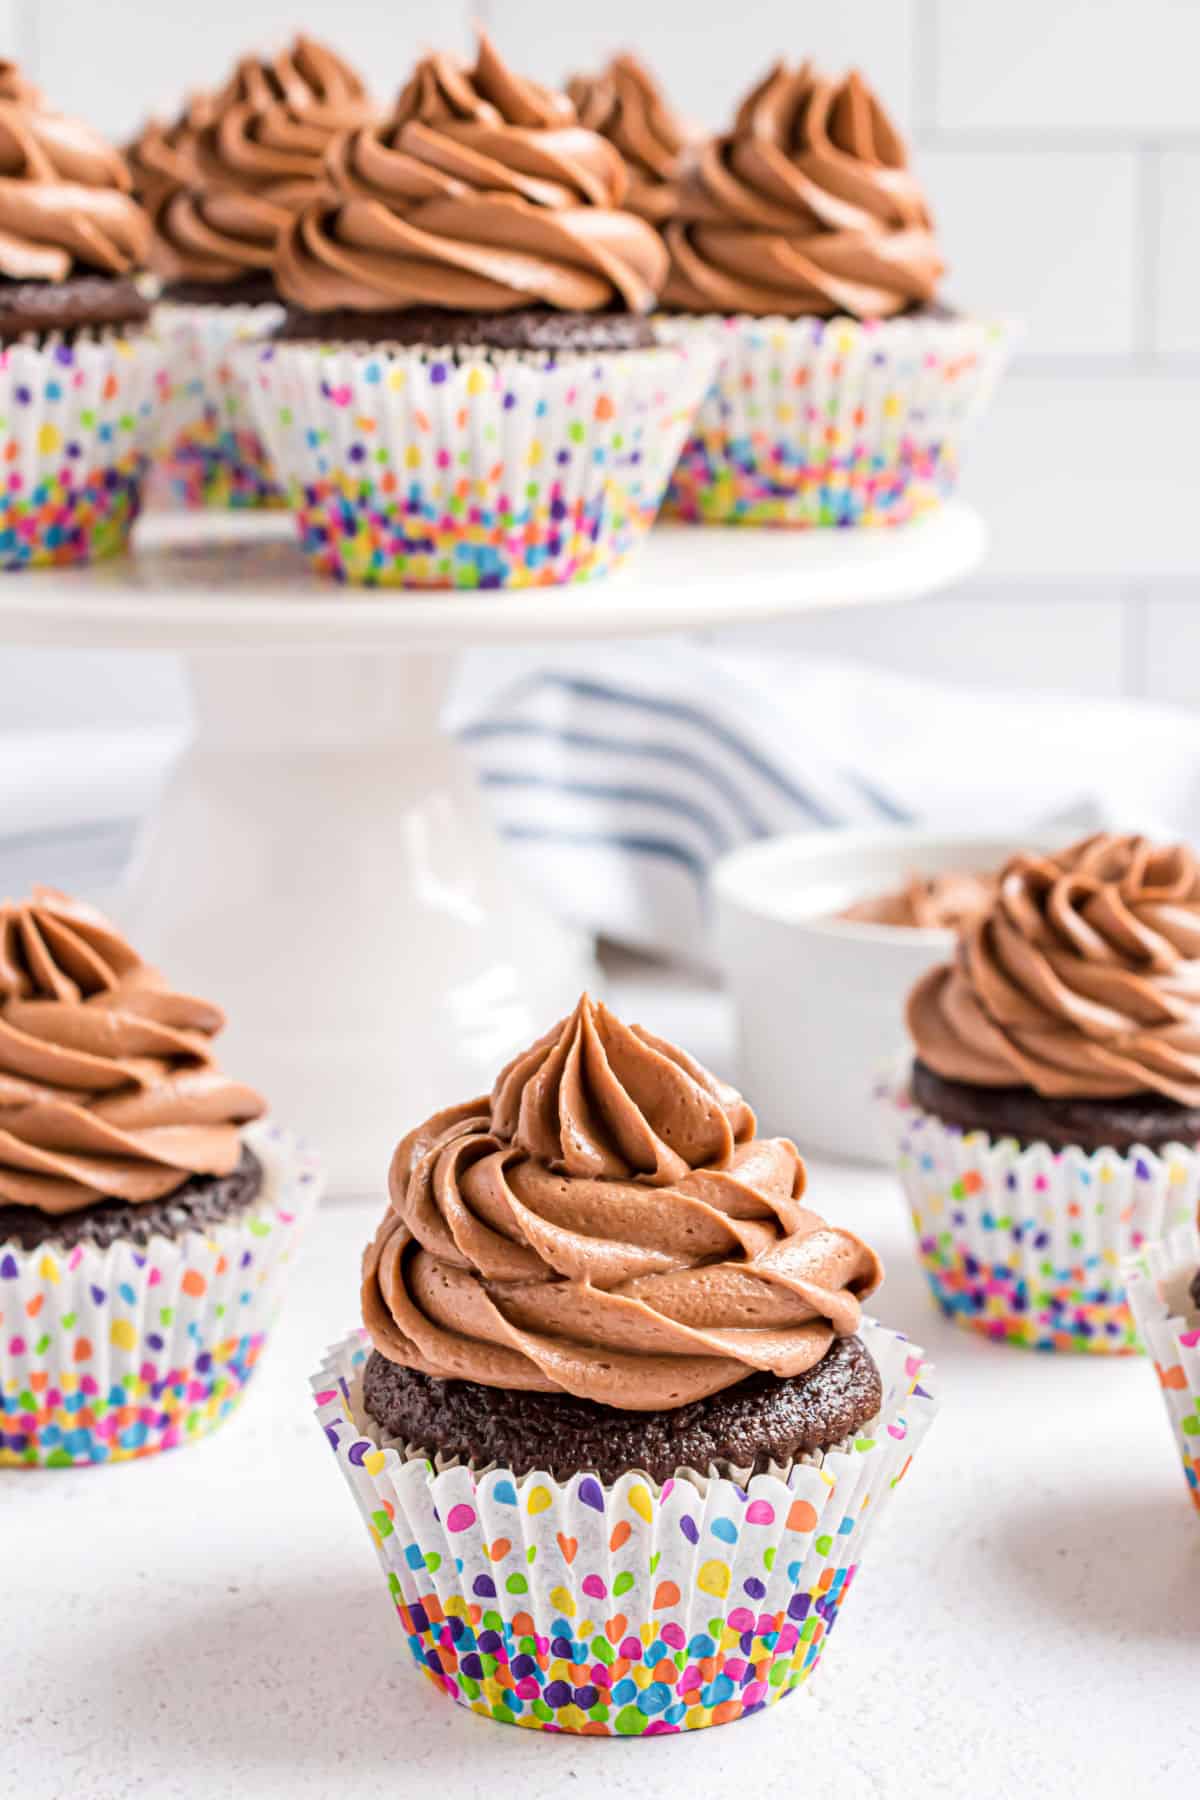 Chocolate cupcakes with chocolate cream cheese frosting.